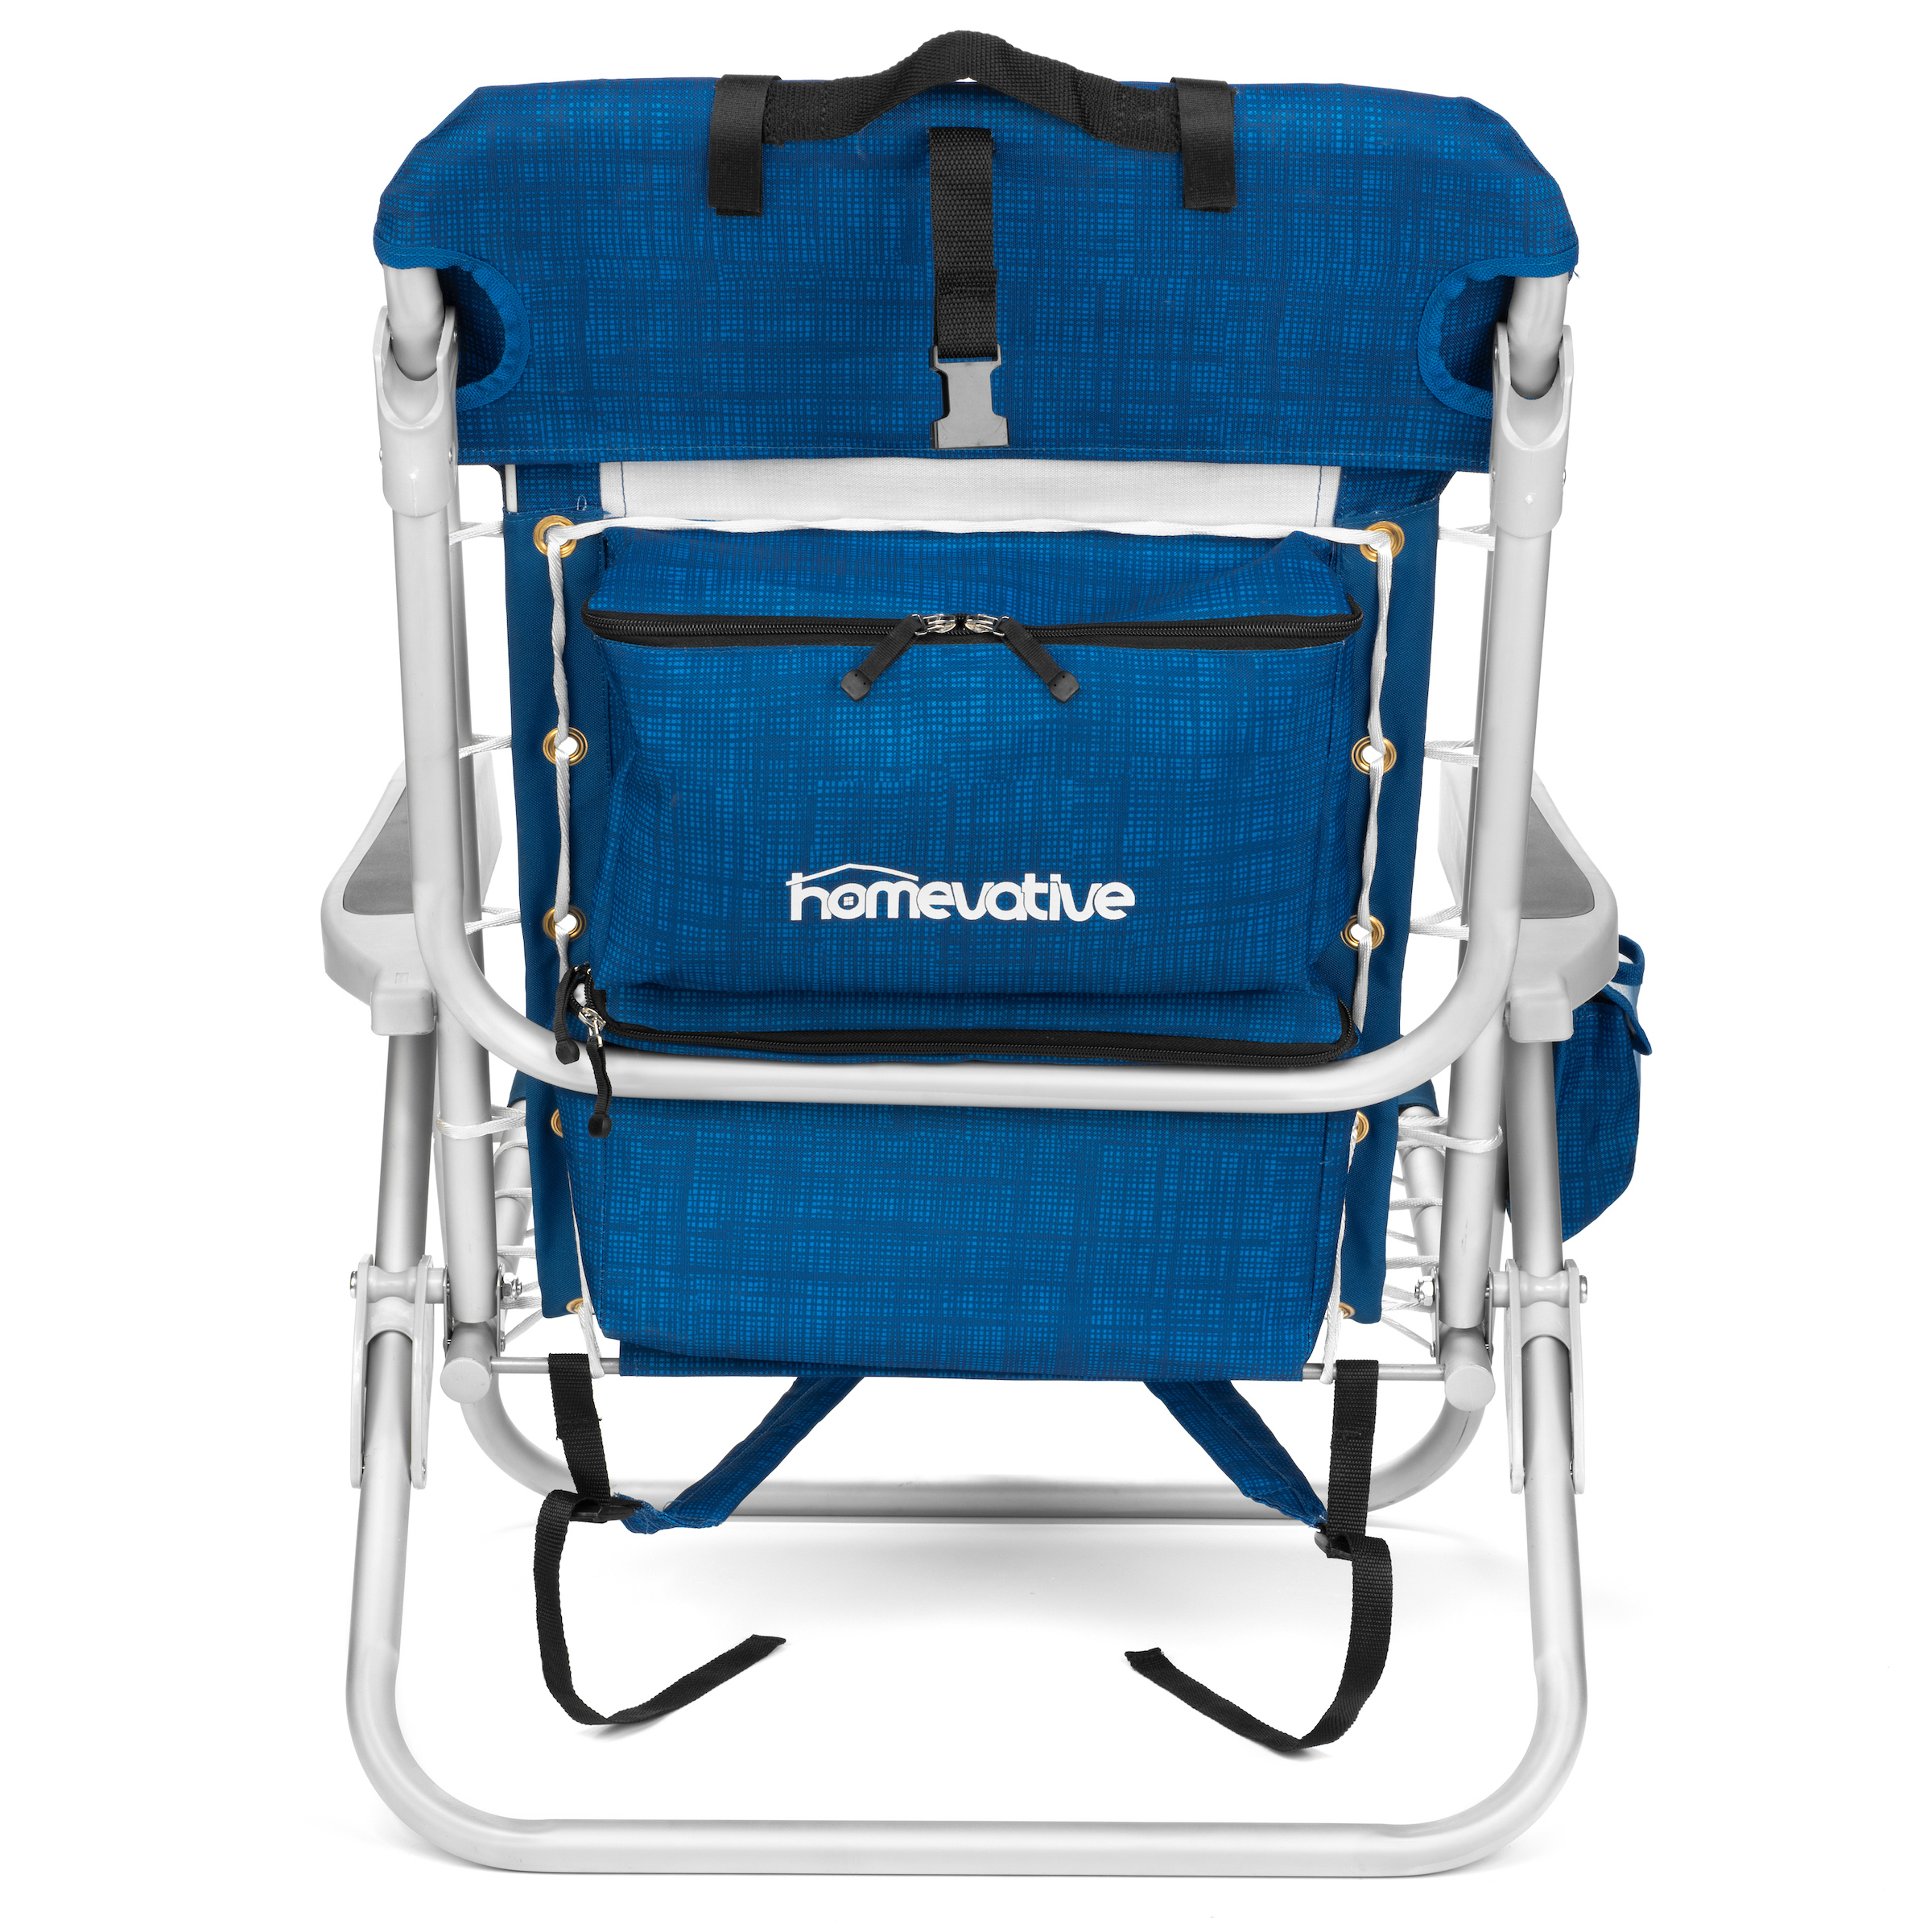 Homevative Folding Backpack Beach Chair with 5 Positions, Towel Bar, Blue - image 2 of 5